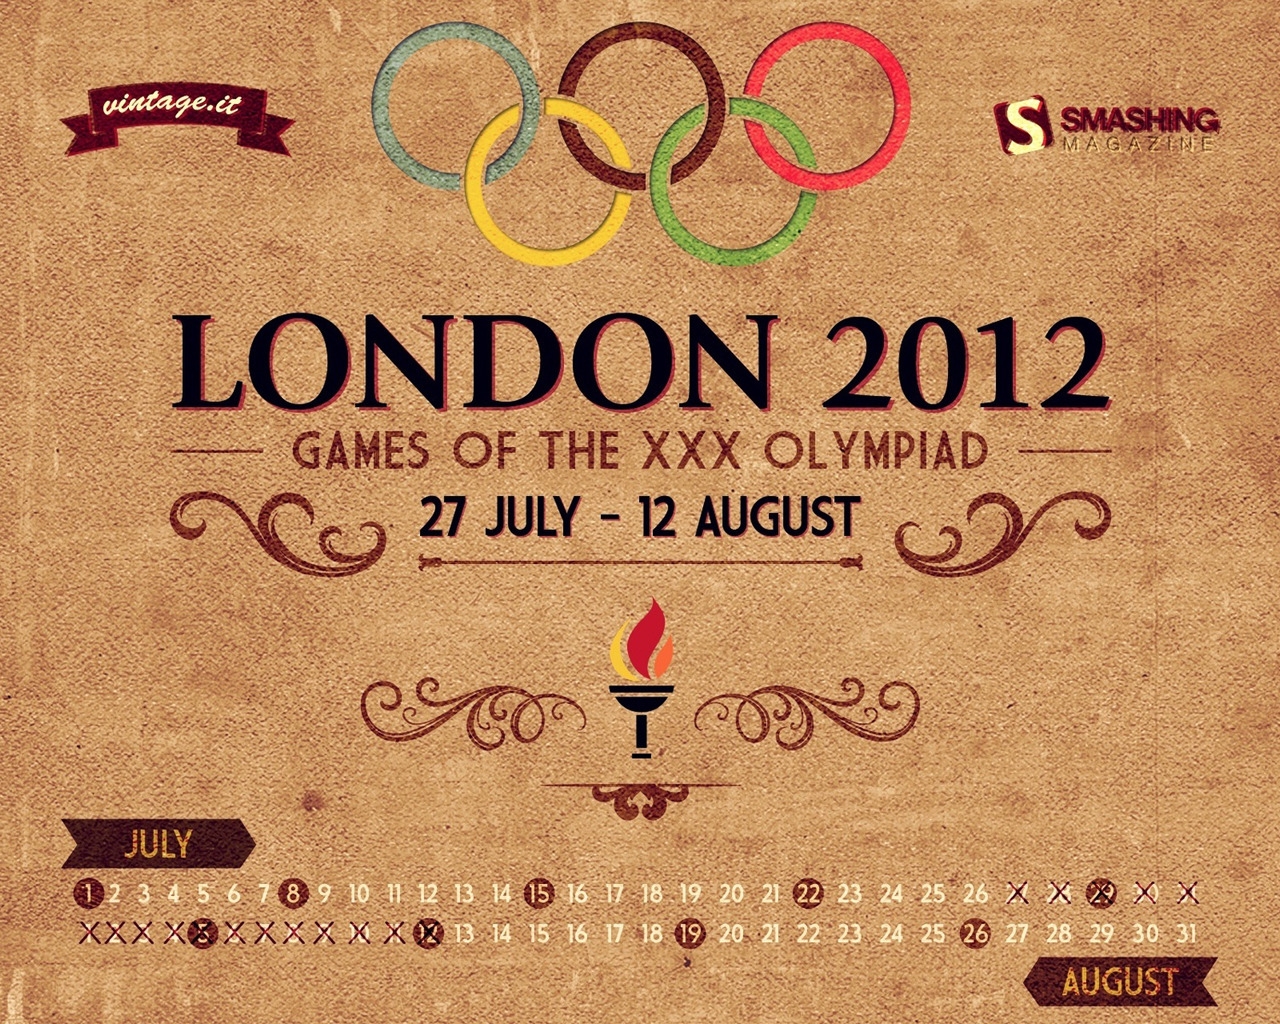 London 2012 Olympics for 1280 x 1024 resolution